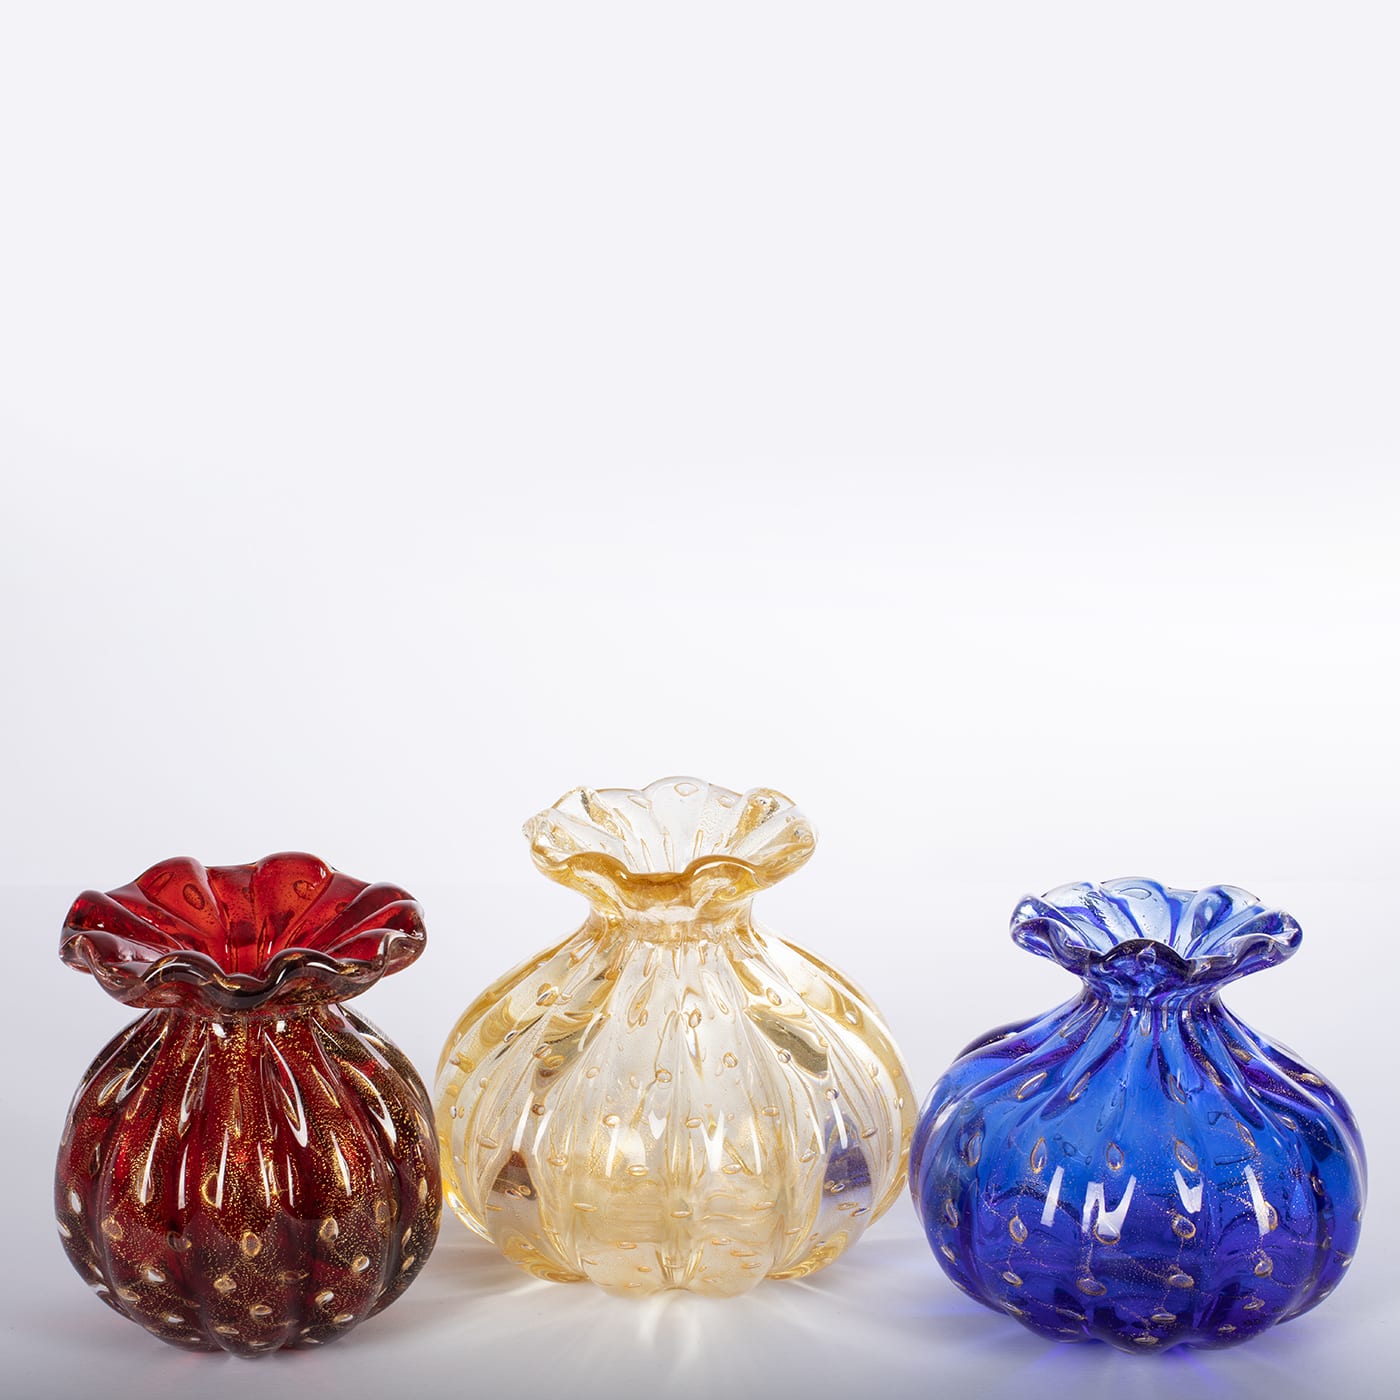 1950 Polychrome Set of 3 Vases with Gold Bubbles - Officine di Murano 1295